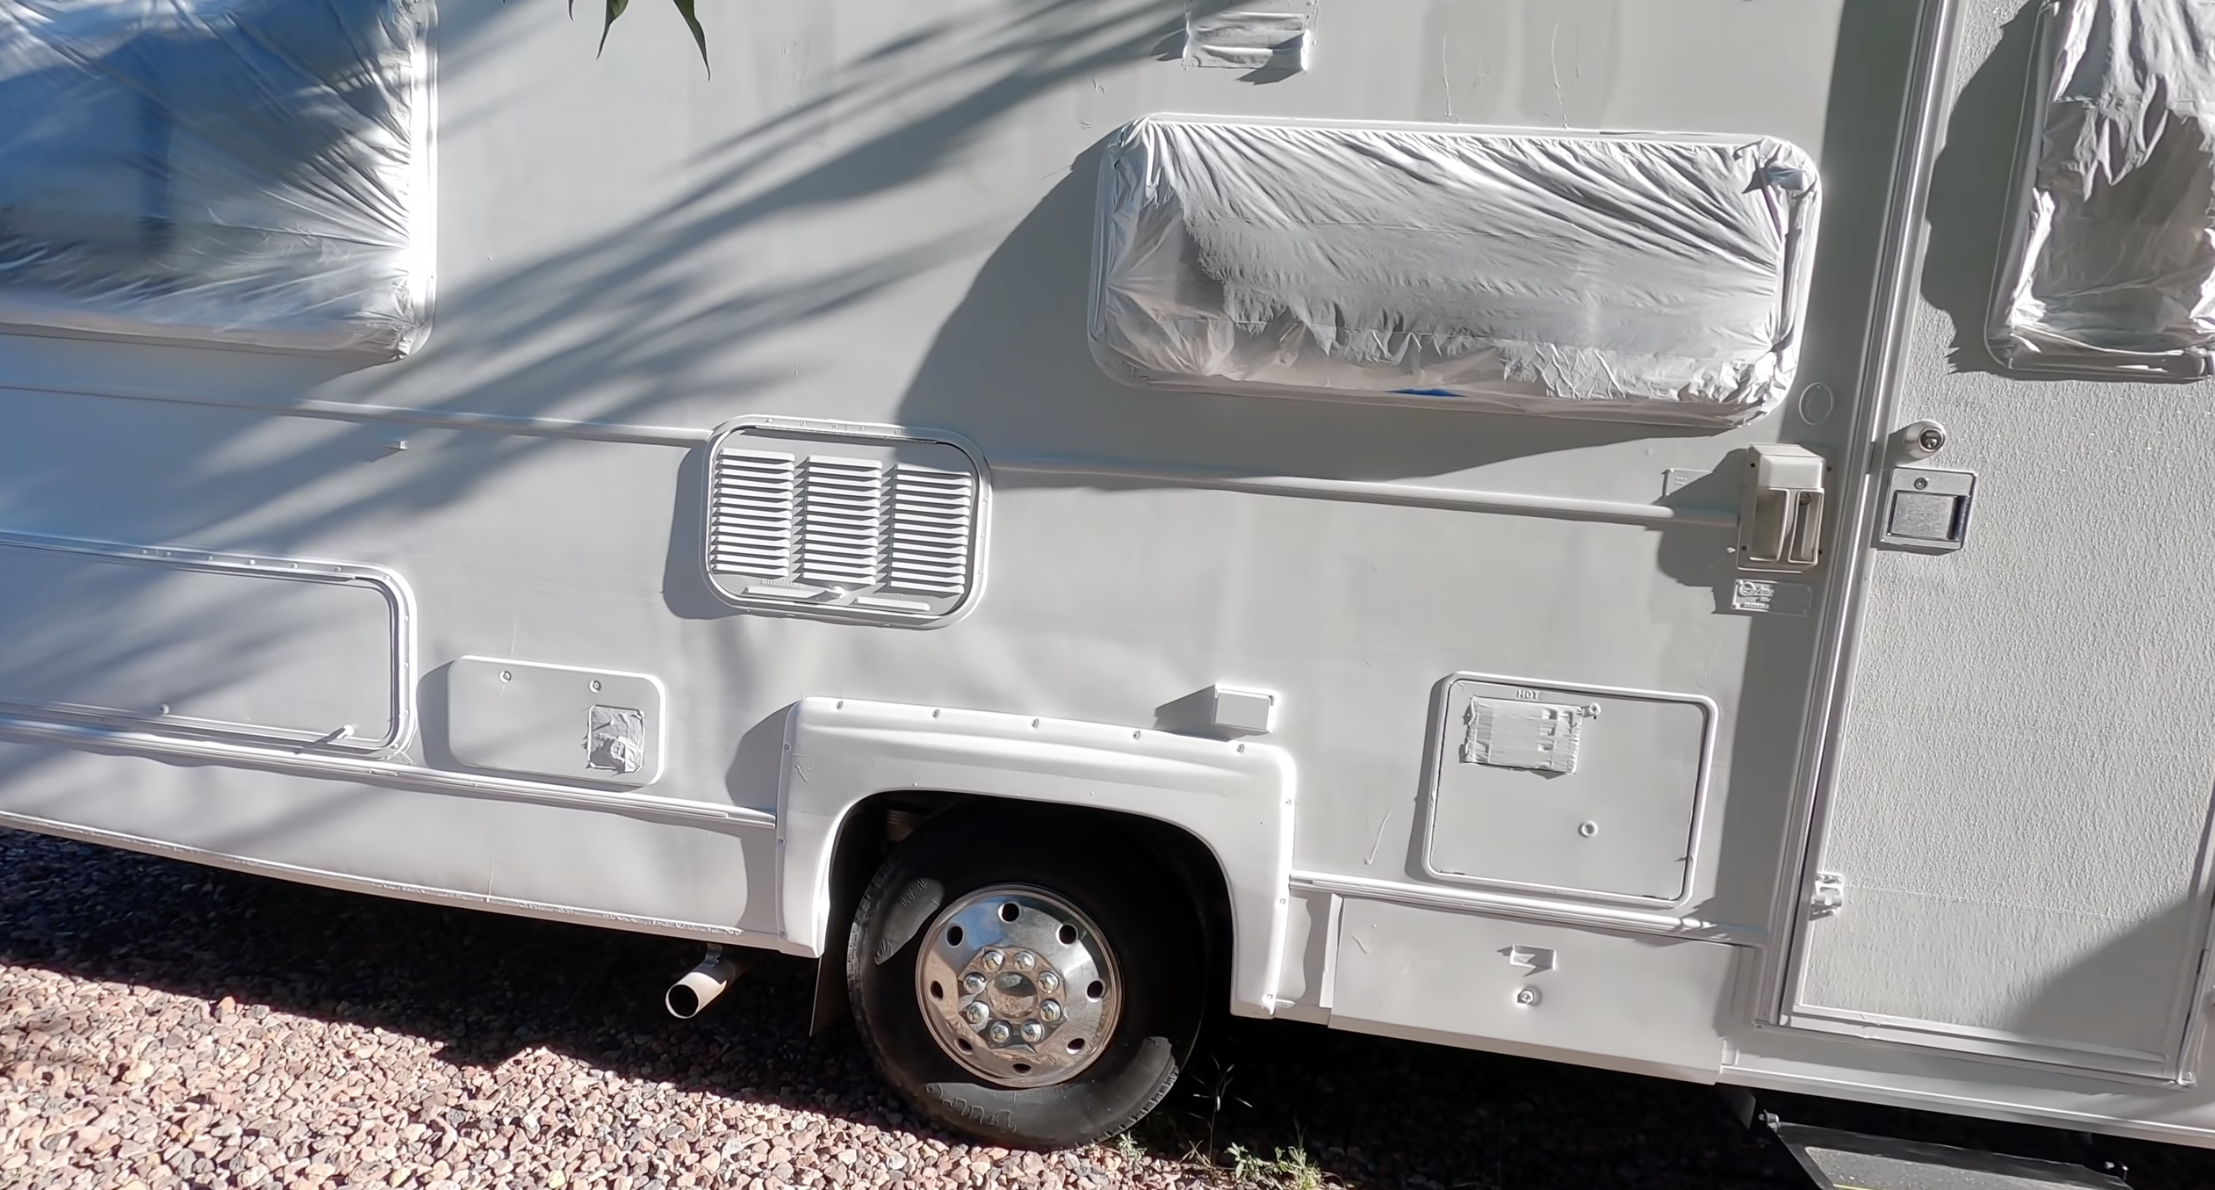 Masking the RV for Painting